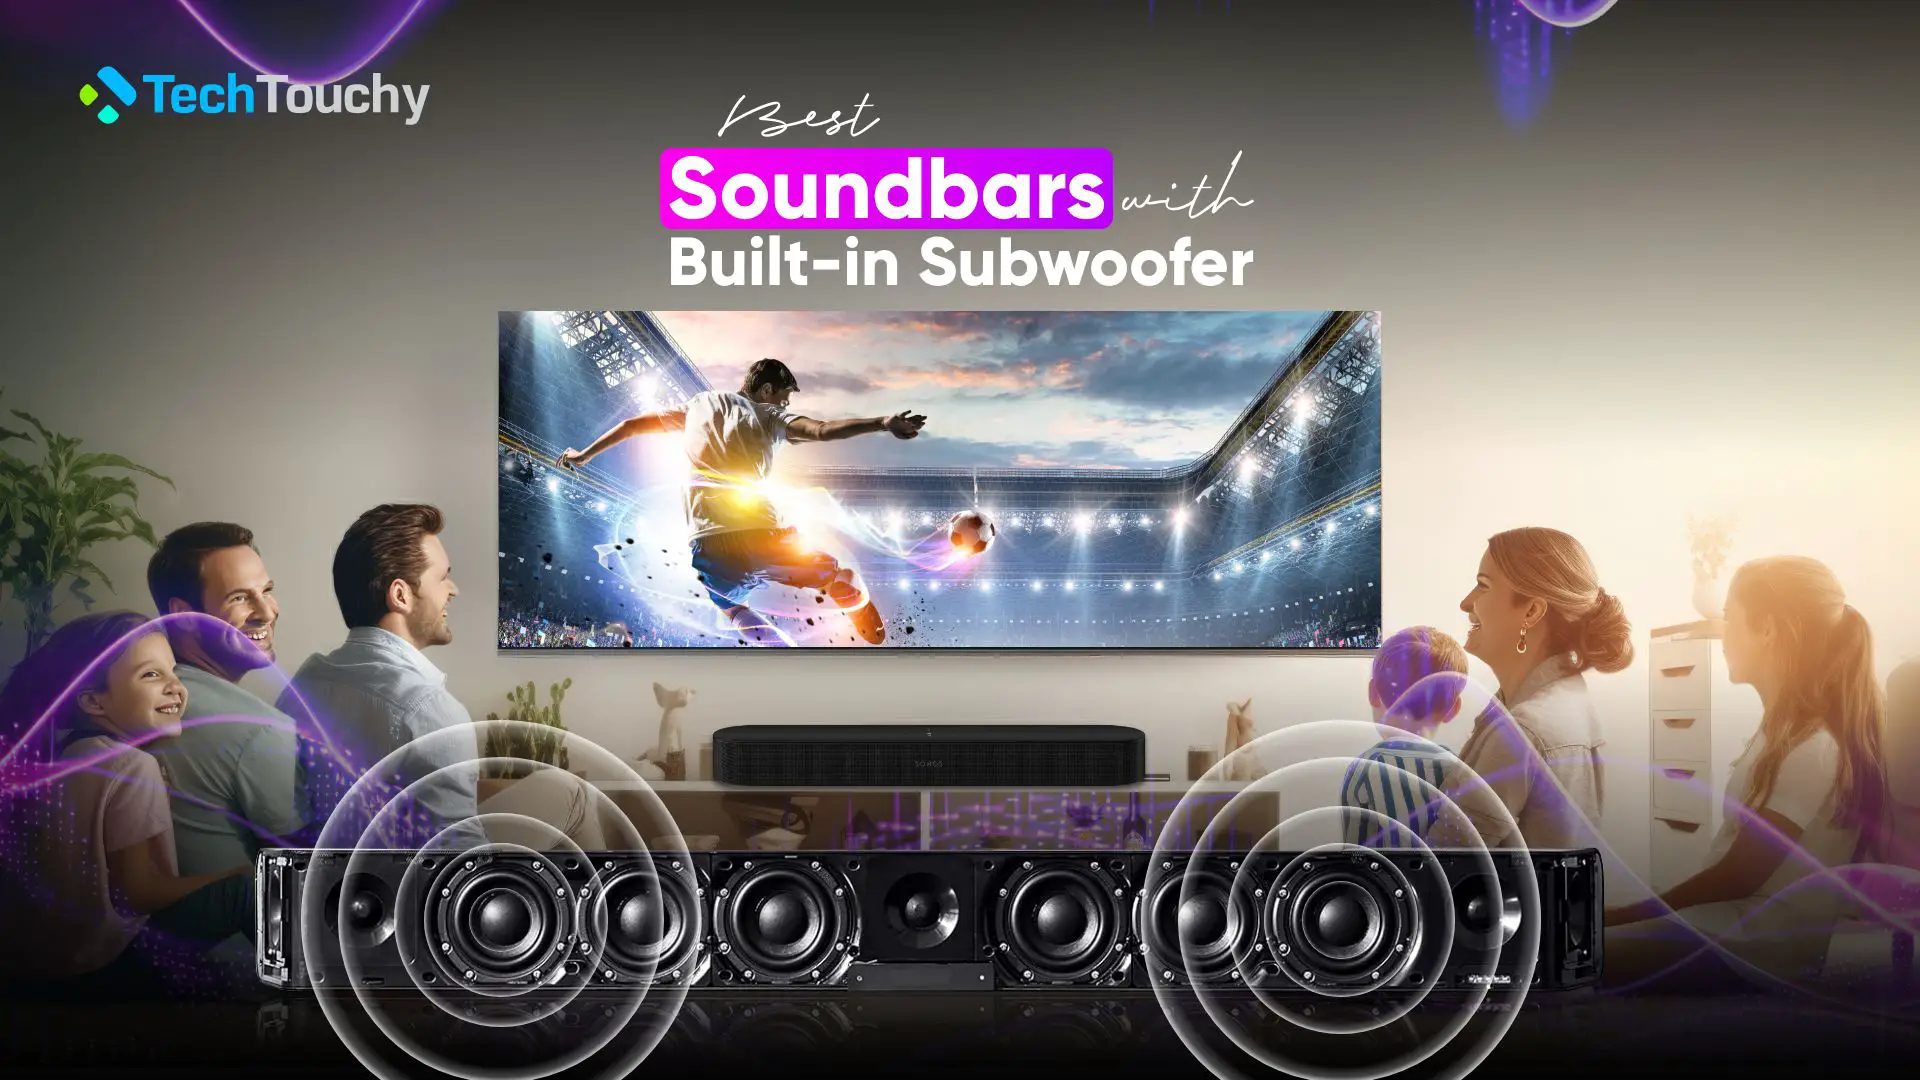 11 Best Soundbars with Built-in Subwoofers in 2023